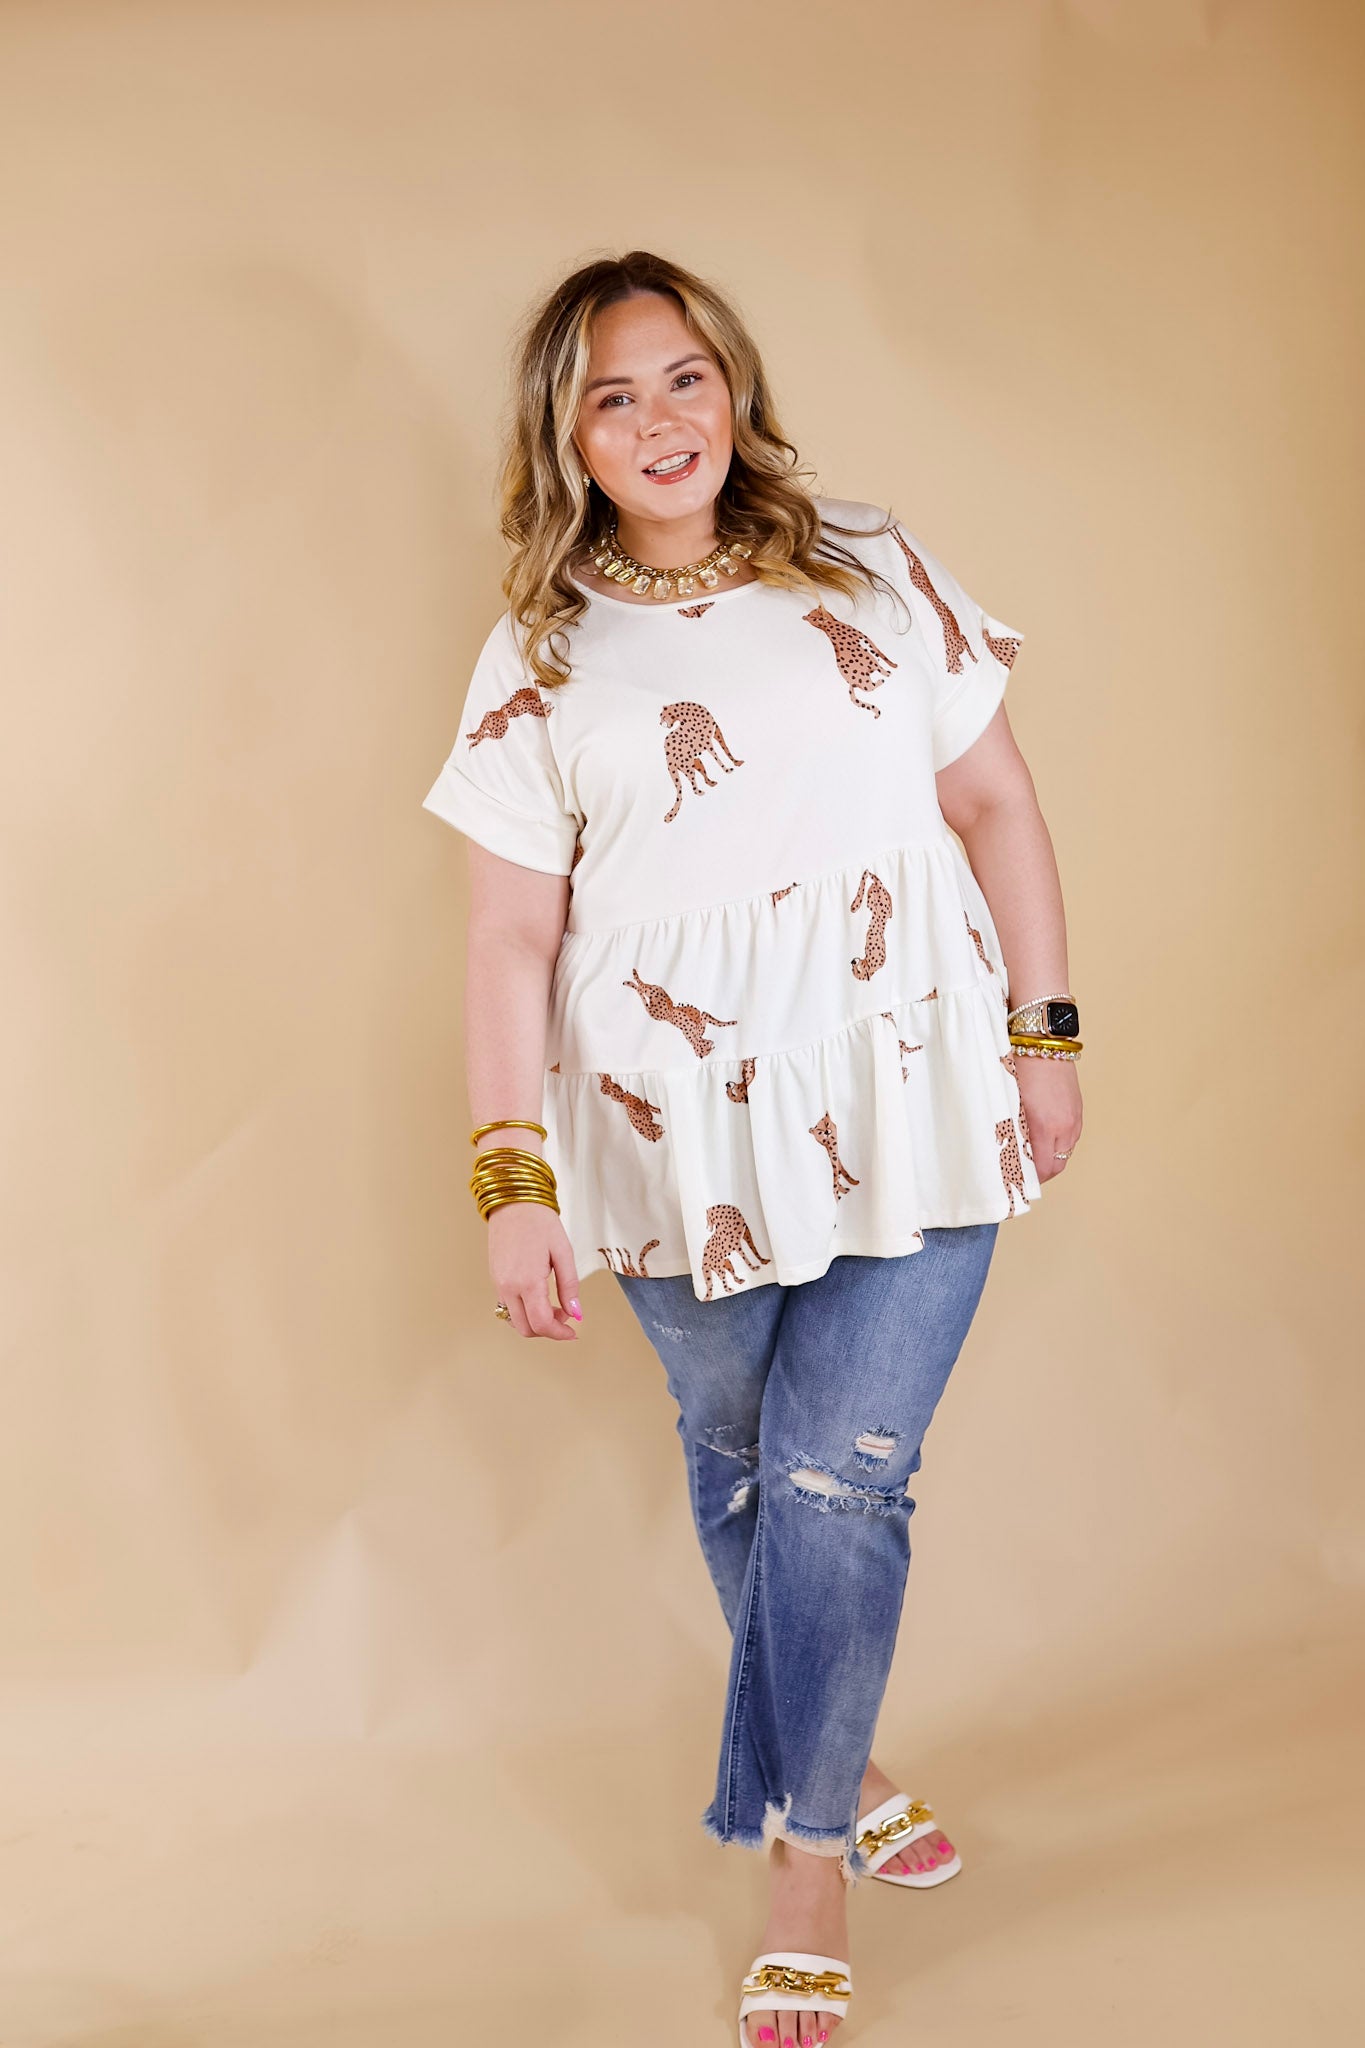 Feeling Wild Cheetah Print Tiered Babydoll Top in Ivory - Giddy Up Glamour Boutique